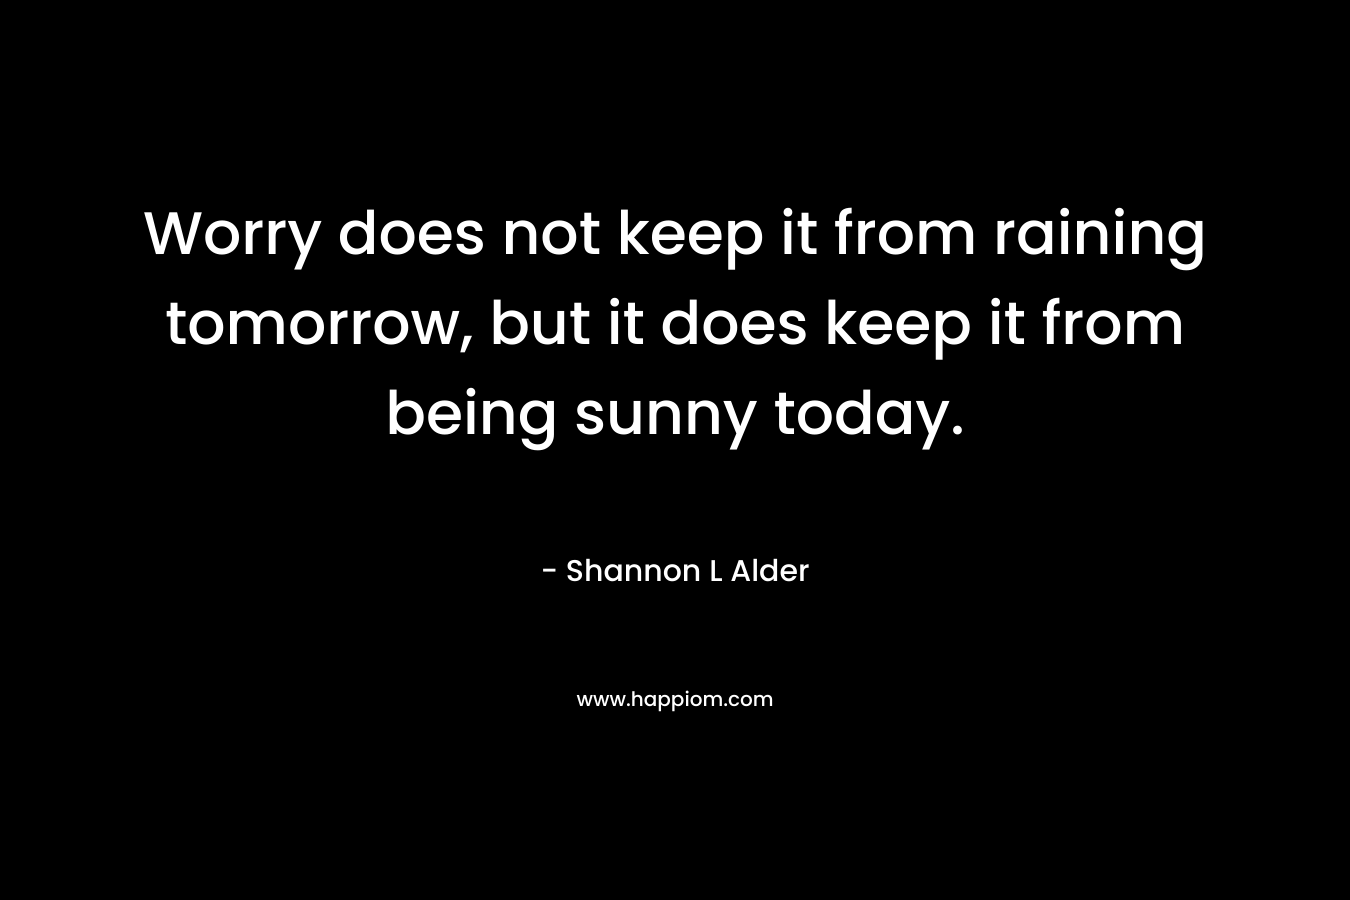 Worry does not keep it from raining tomorrow, but it does keep it from being sunny today.